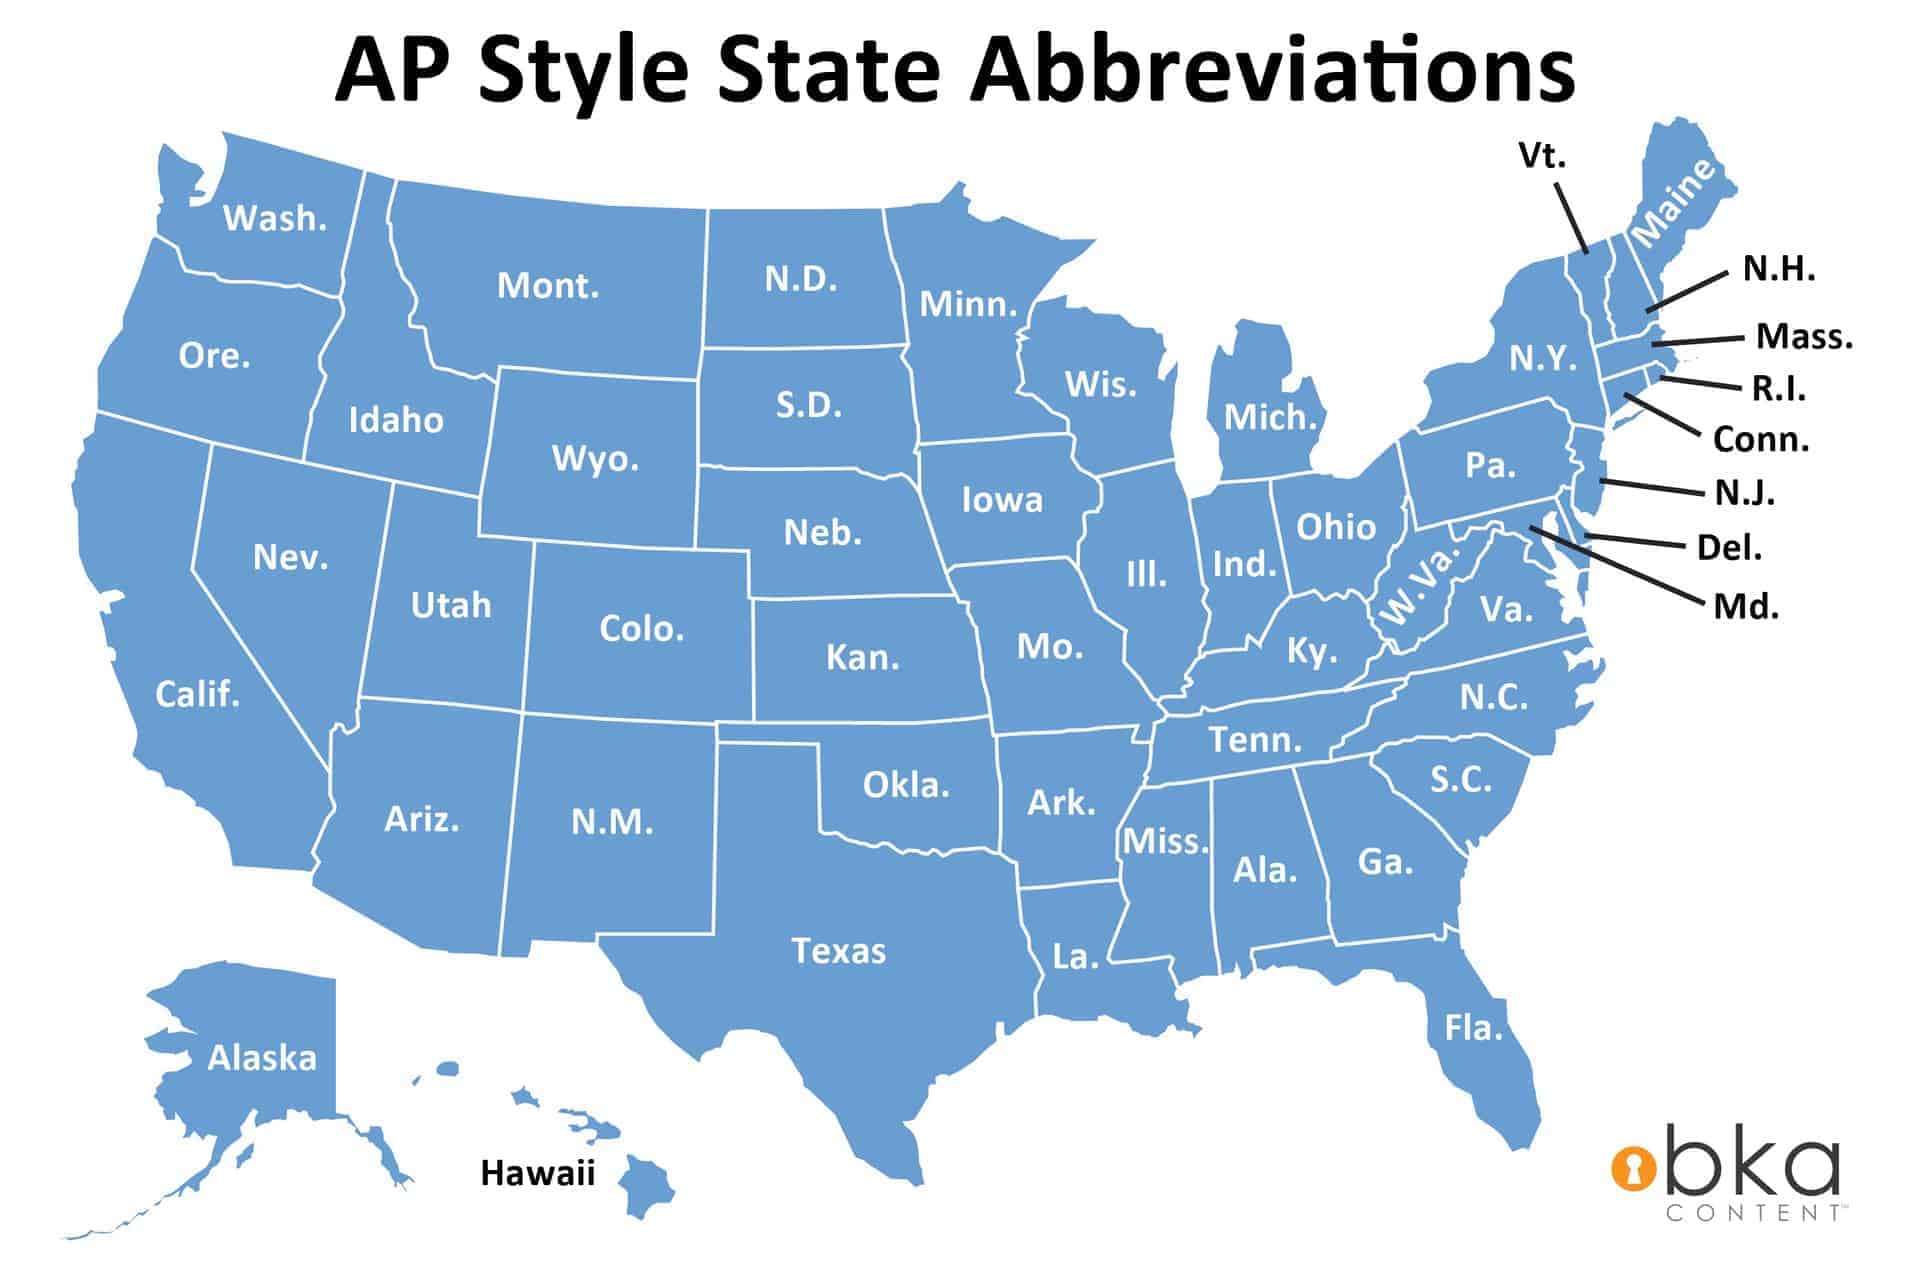 ap-style-state-name-abbreviations-bka-content